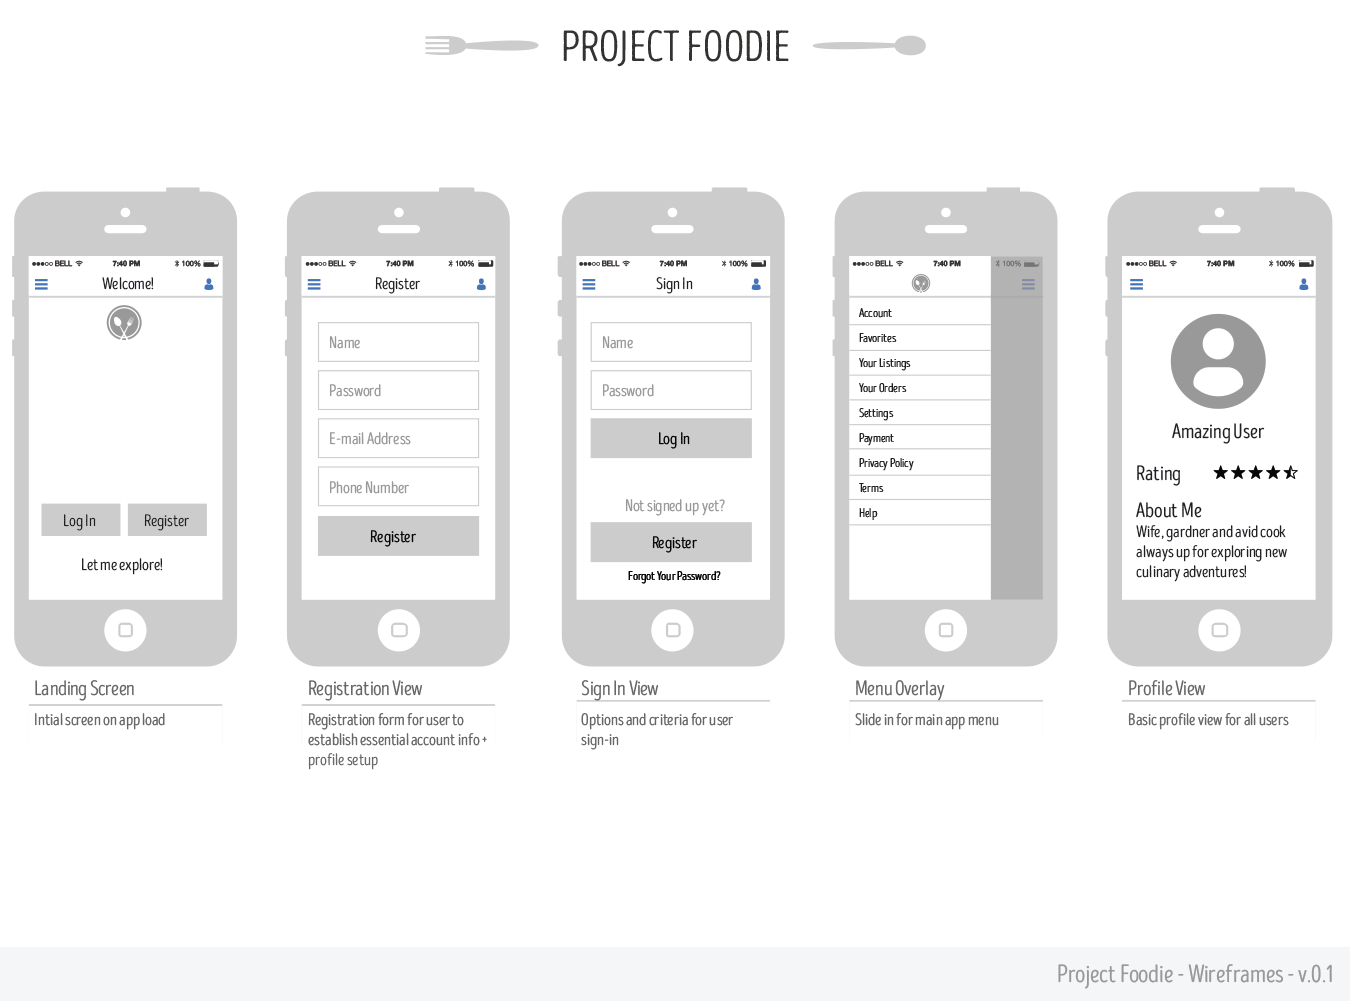 Wireframe for Project Foodie mobile product